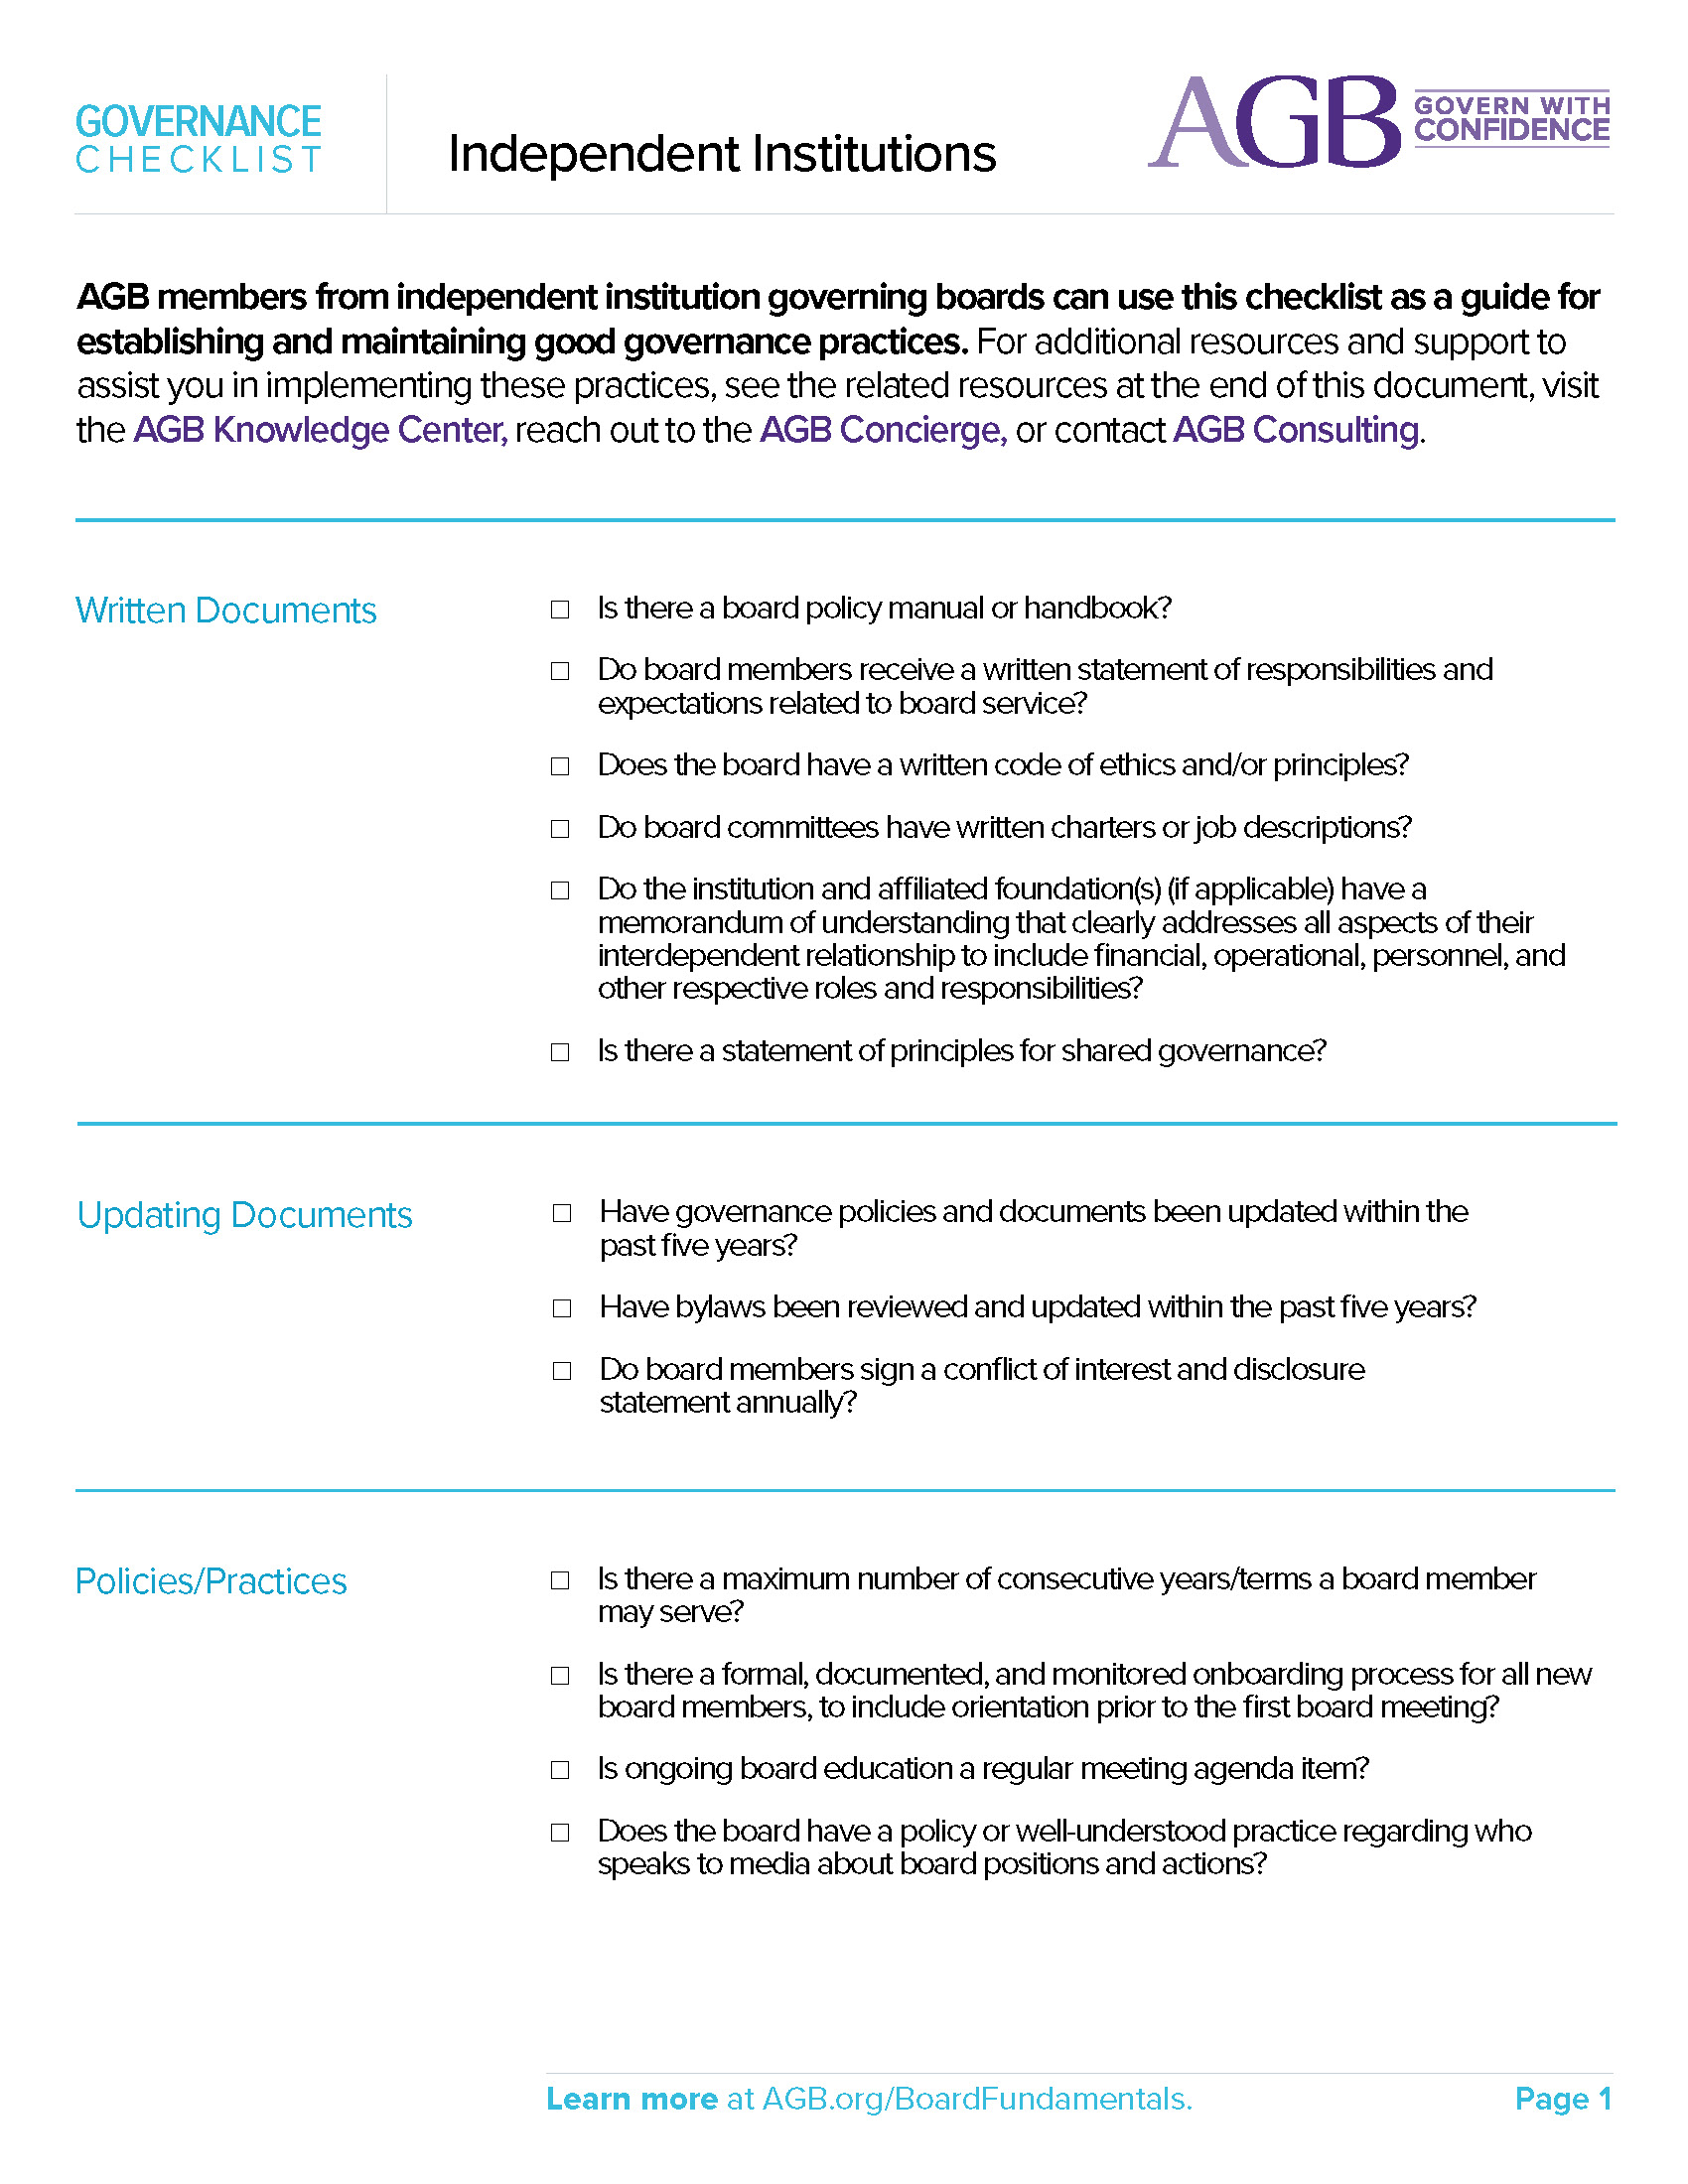 Higher Education Independent Institutions Governance Checklist from AGB